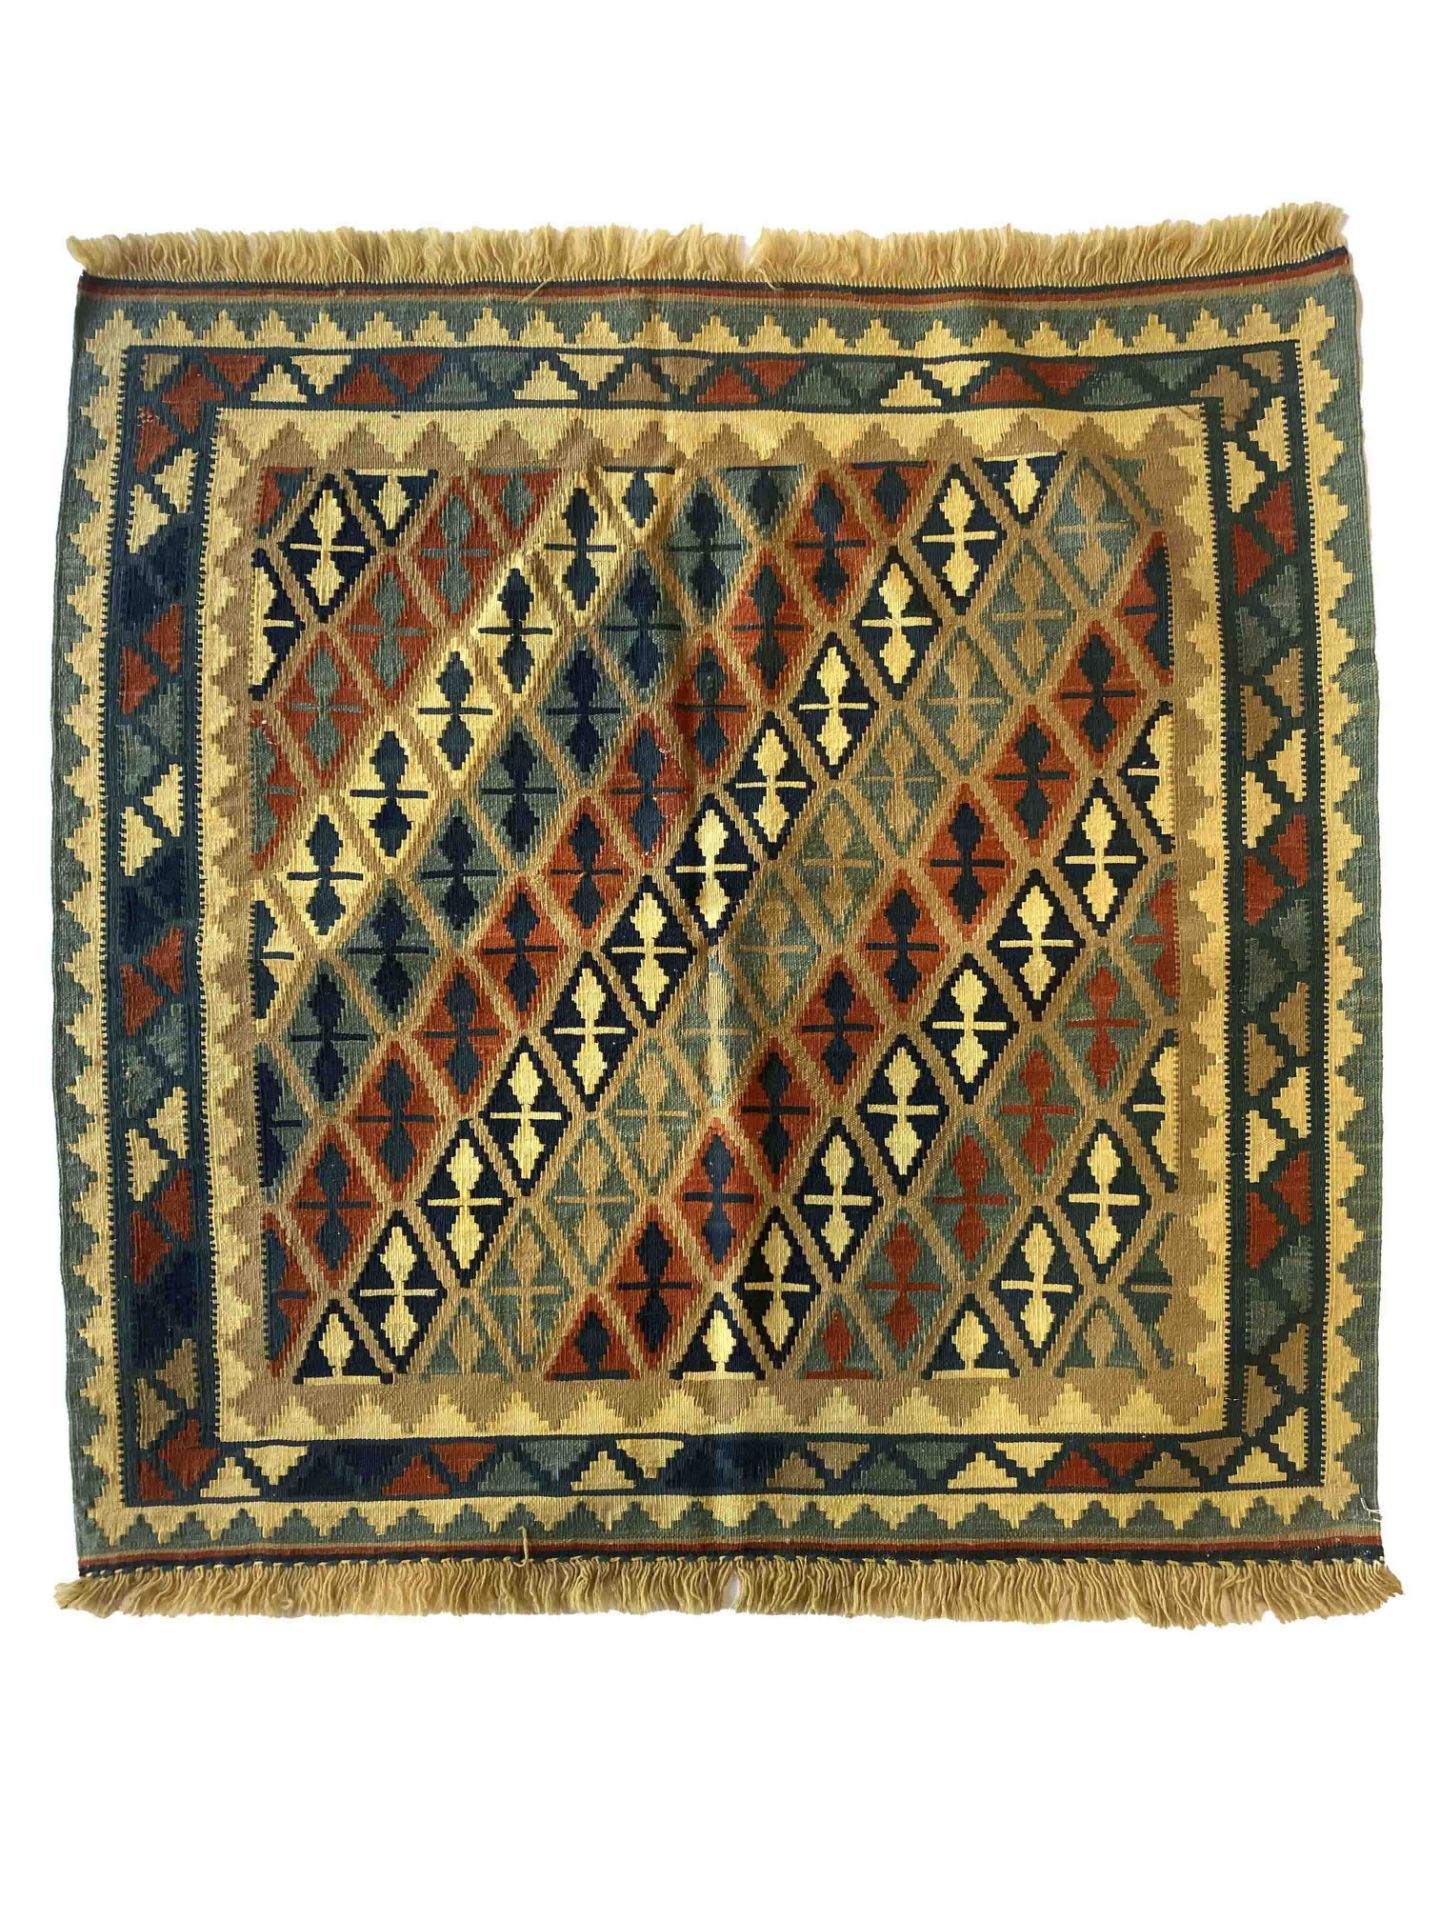 Kilim, Persia, good condition, 105 x 104 cm - The carpet can only be viewed and collected at another